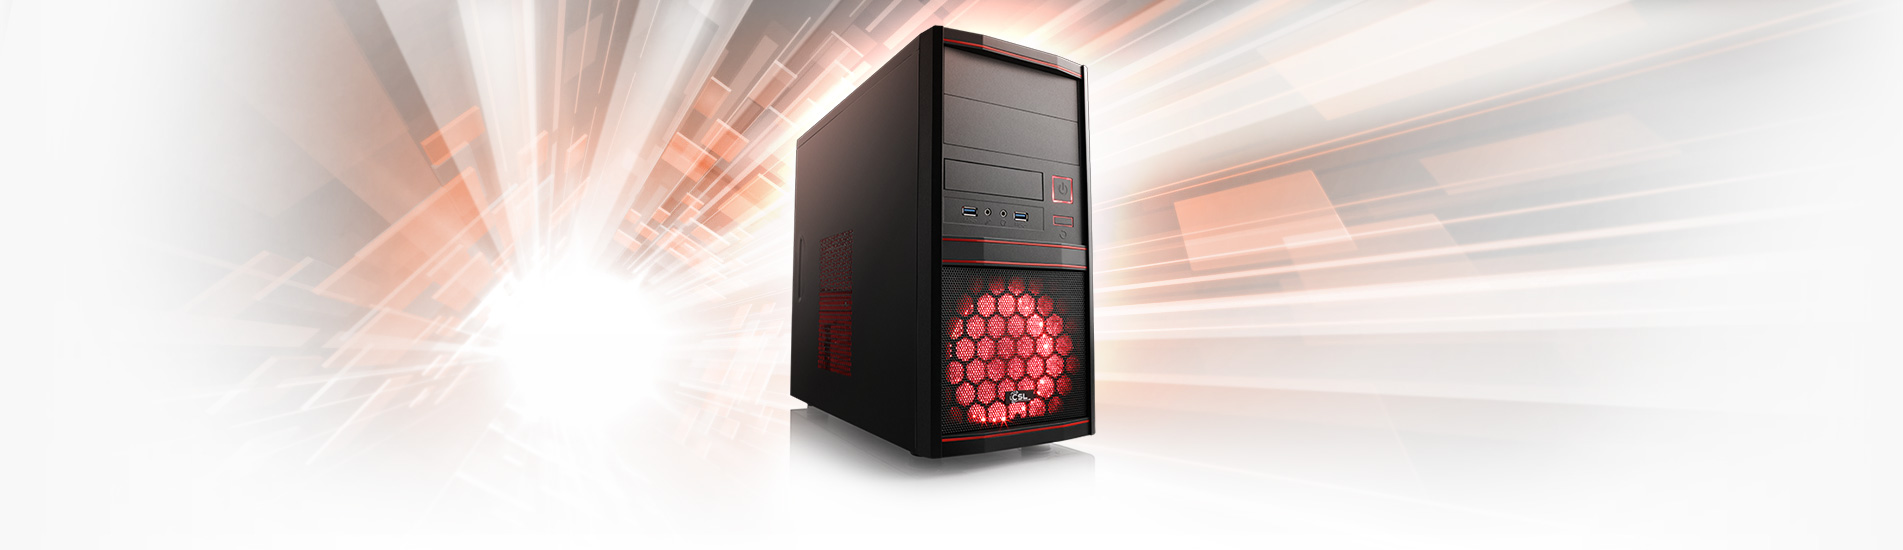 A powerful AMD Ryzen™ 5 PC with 16 GB RAM for office, 4K multimedia and eSports gaming in Full HD.
